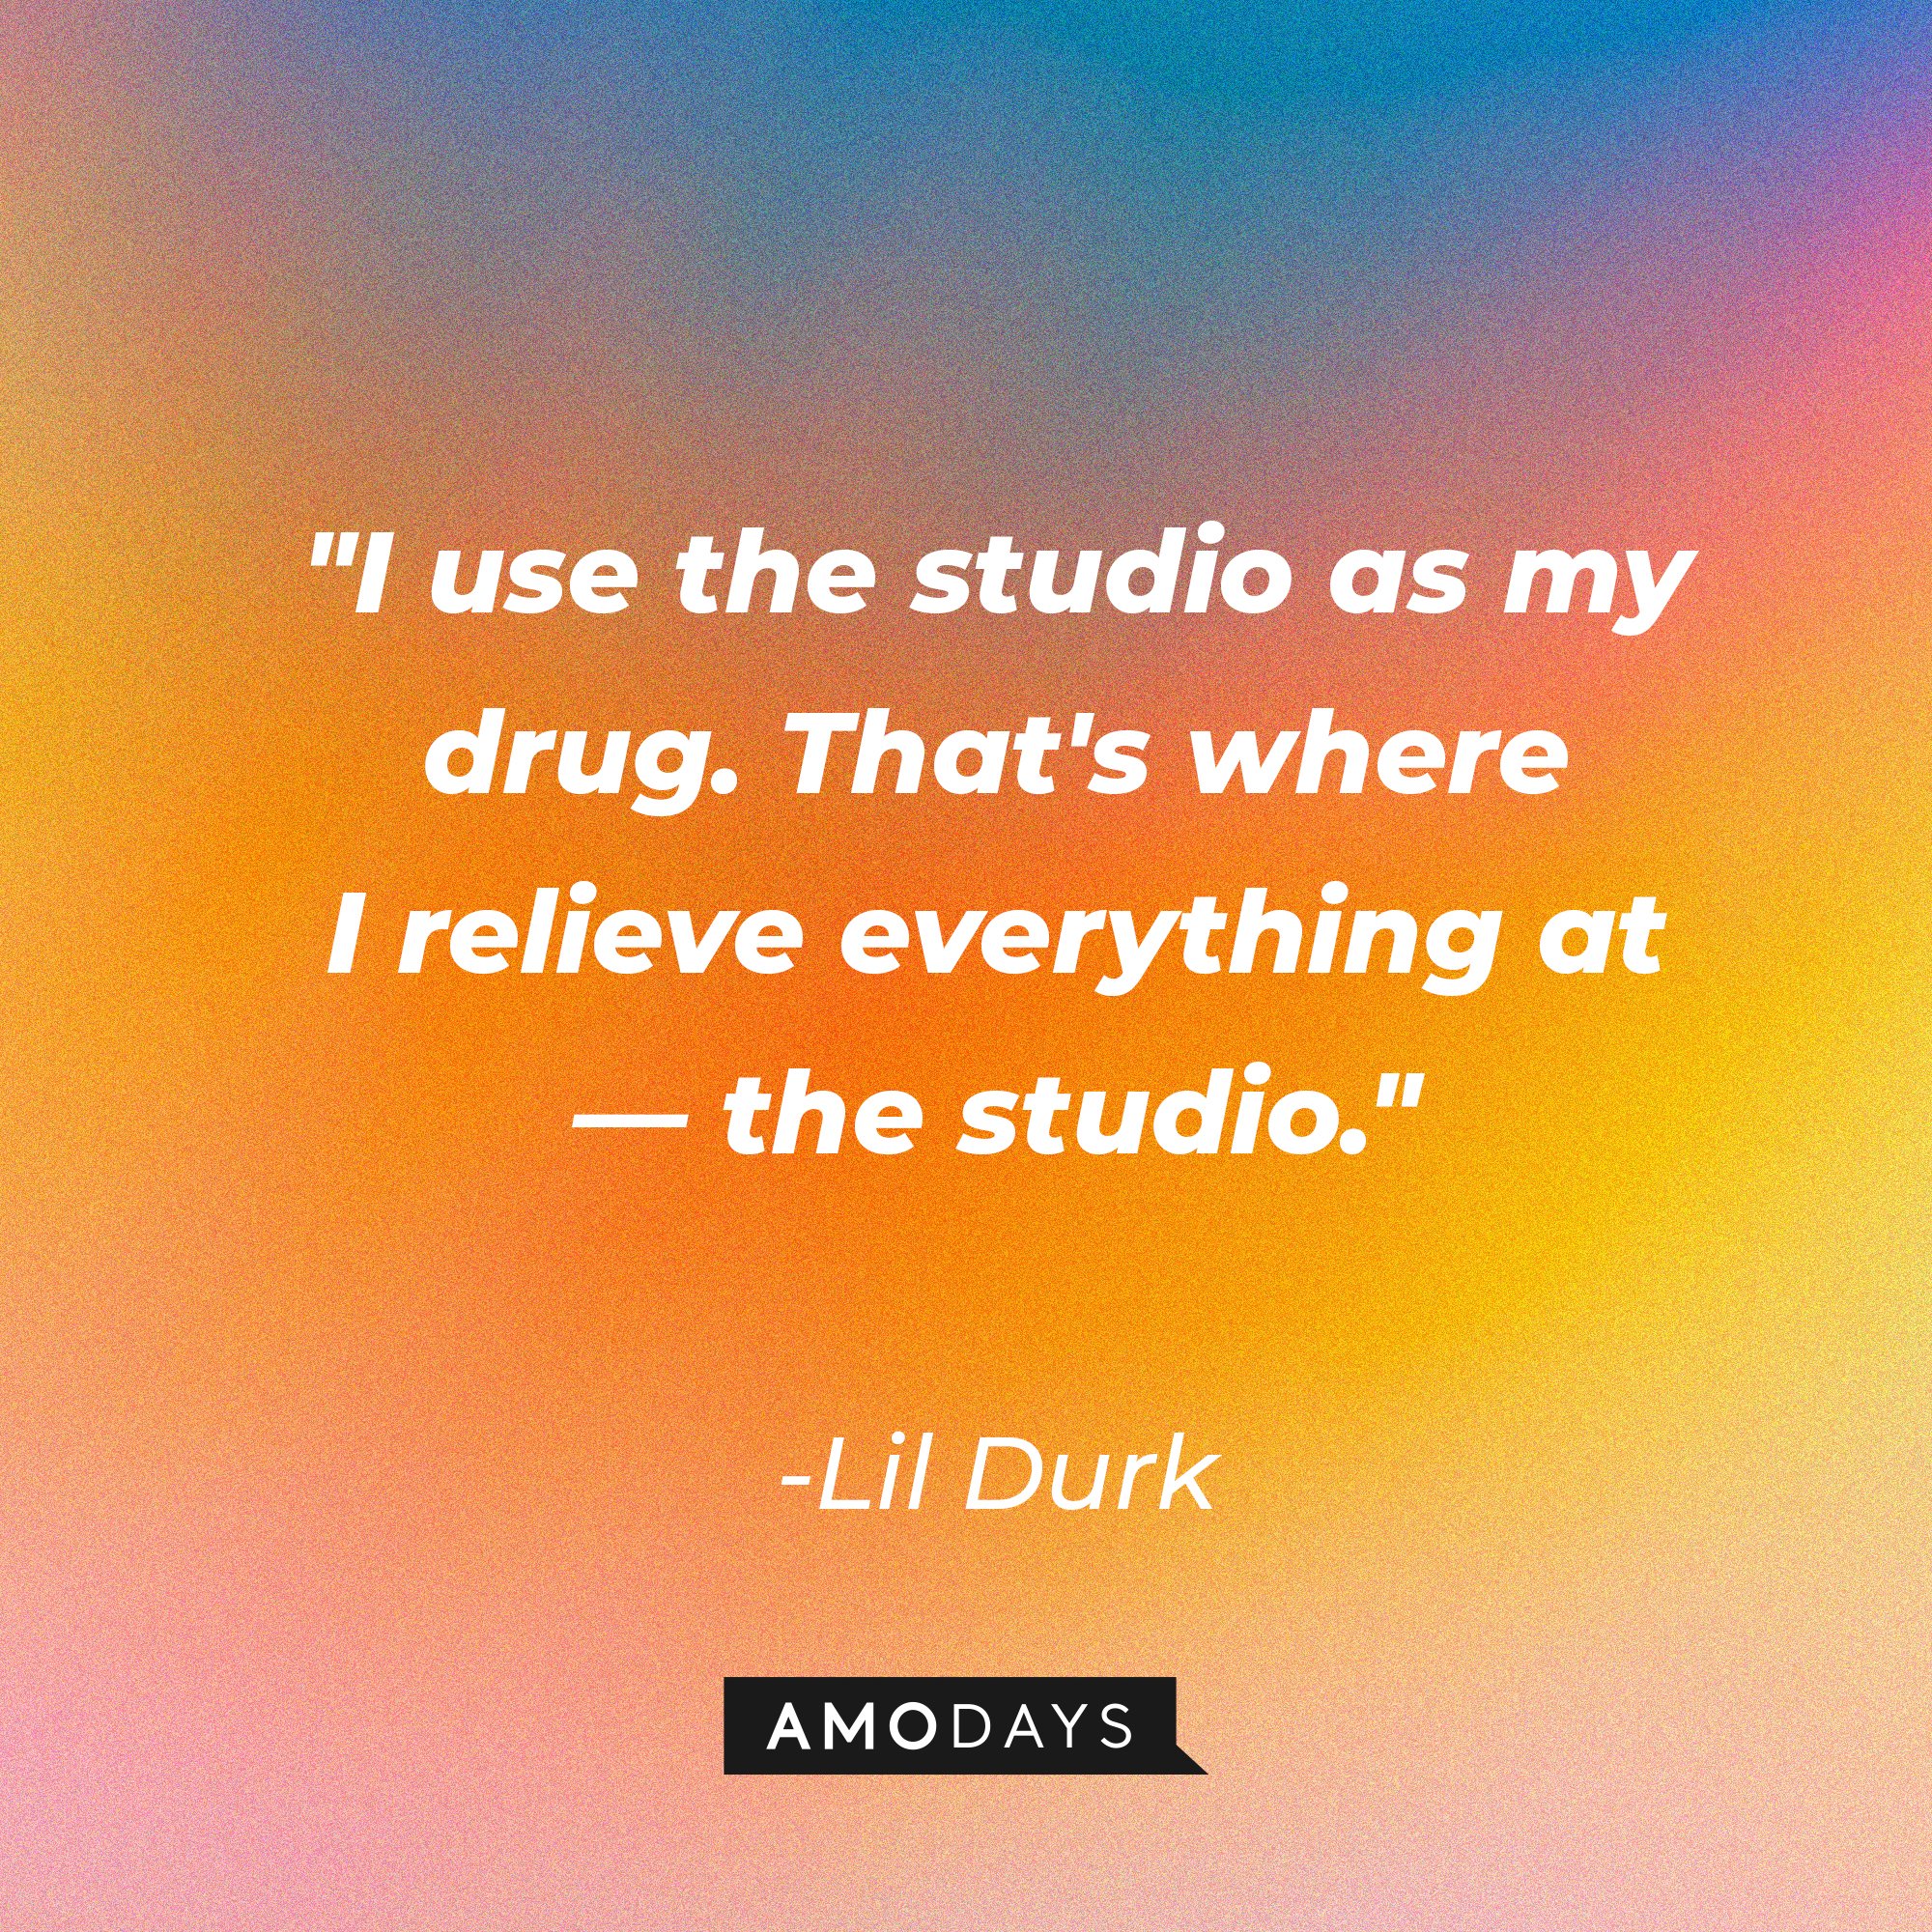 Lil Durk’s quote: "I use the studio as my drug. That's where I relieve everything at — the studio." | Image: AmoDays